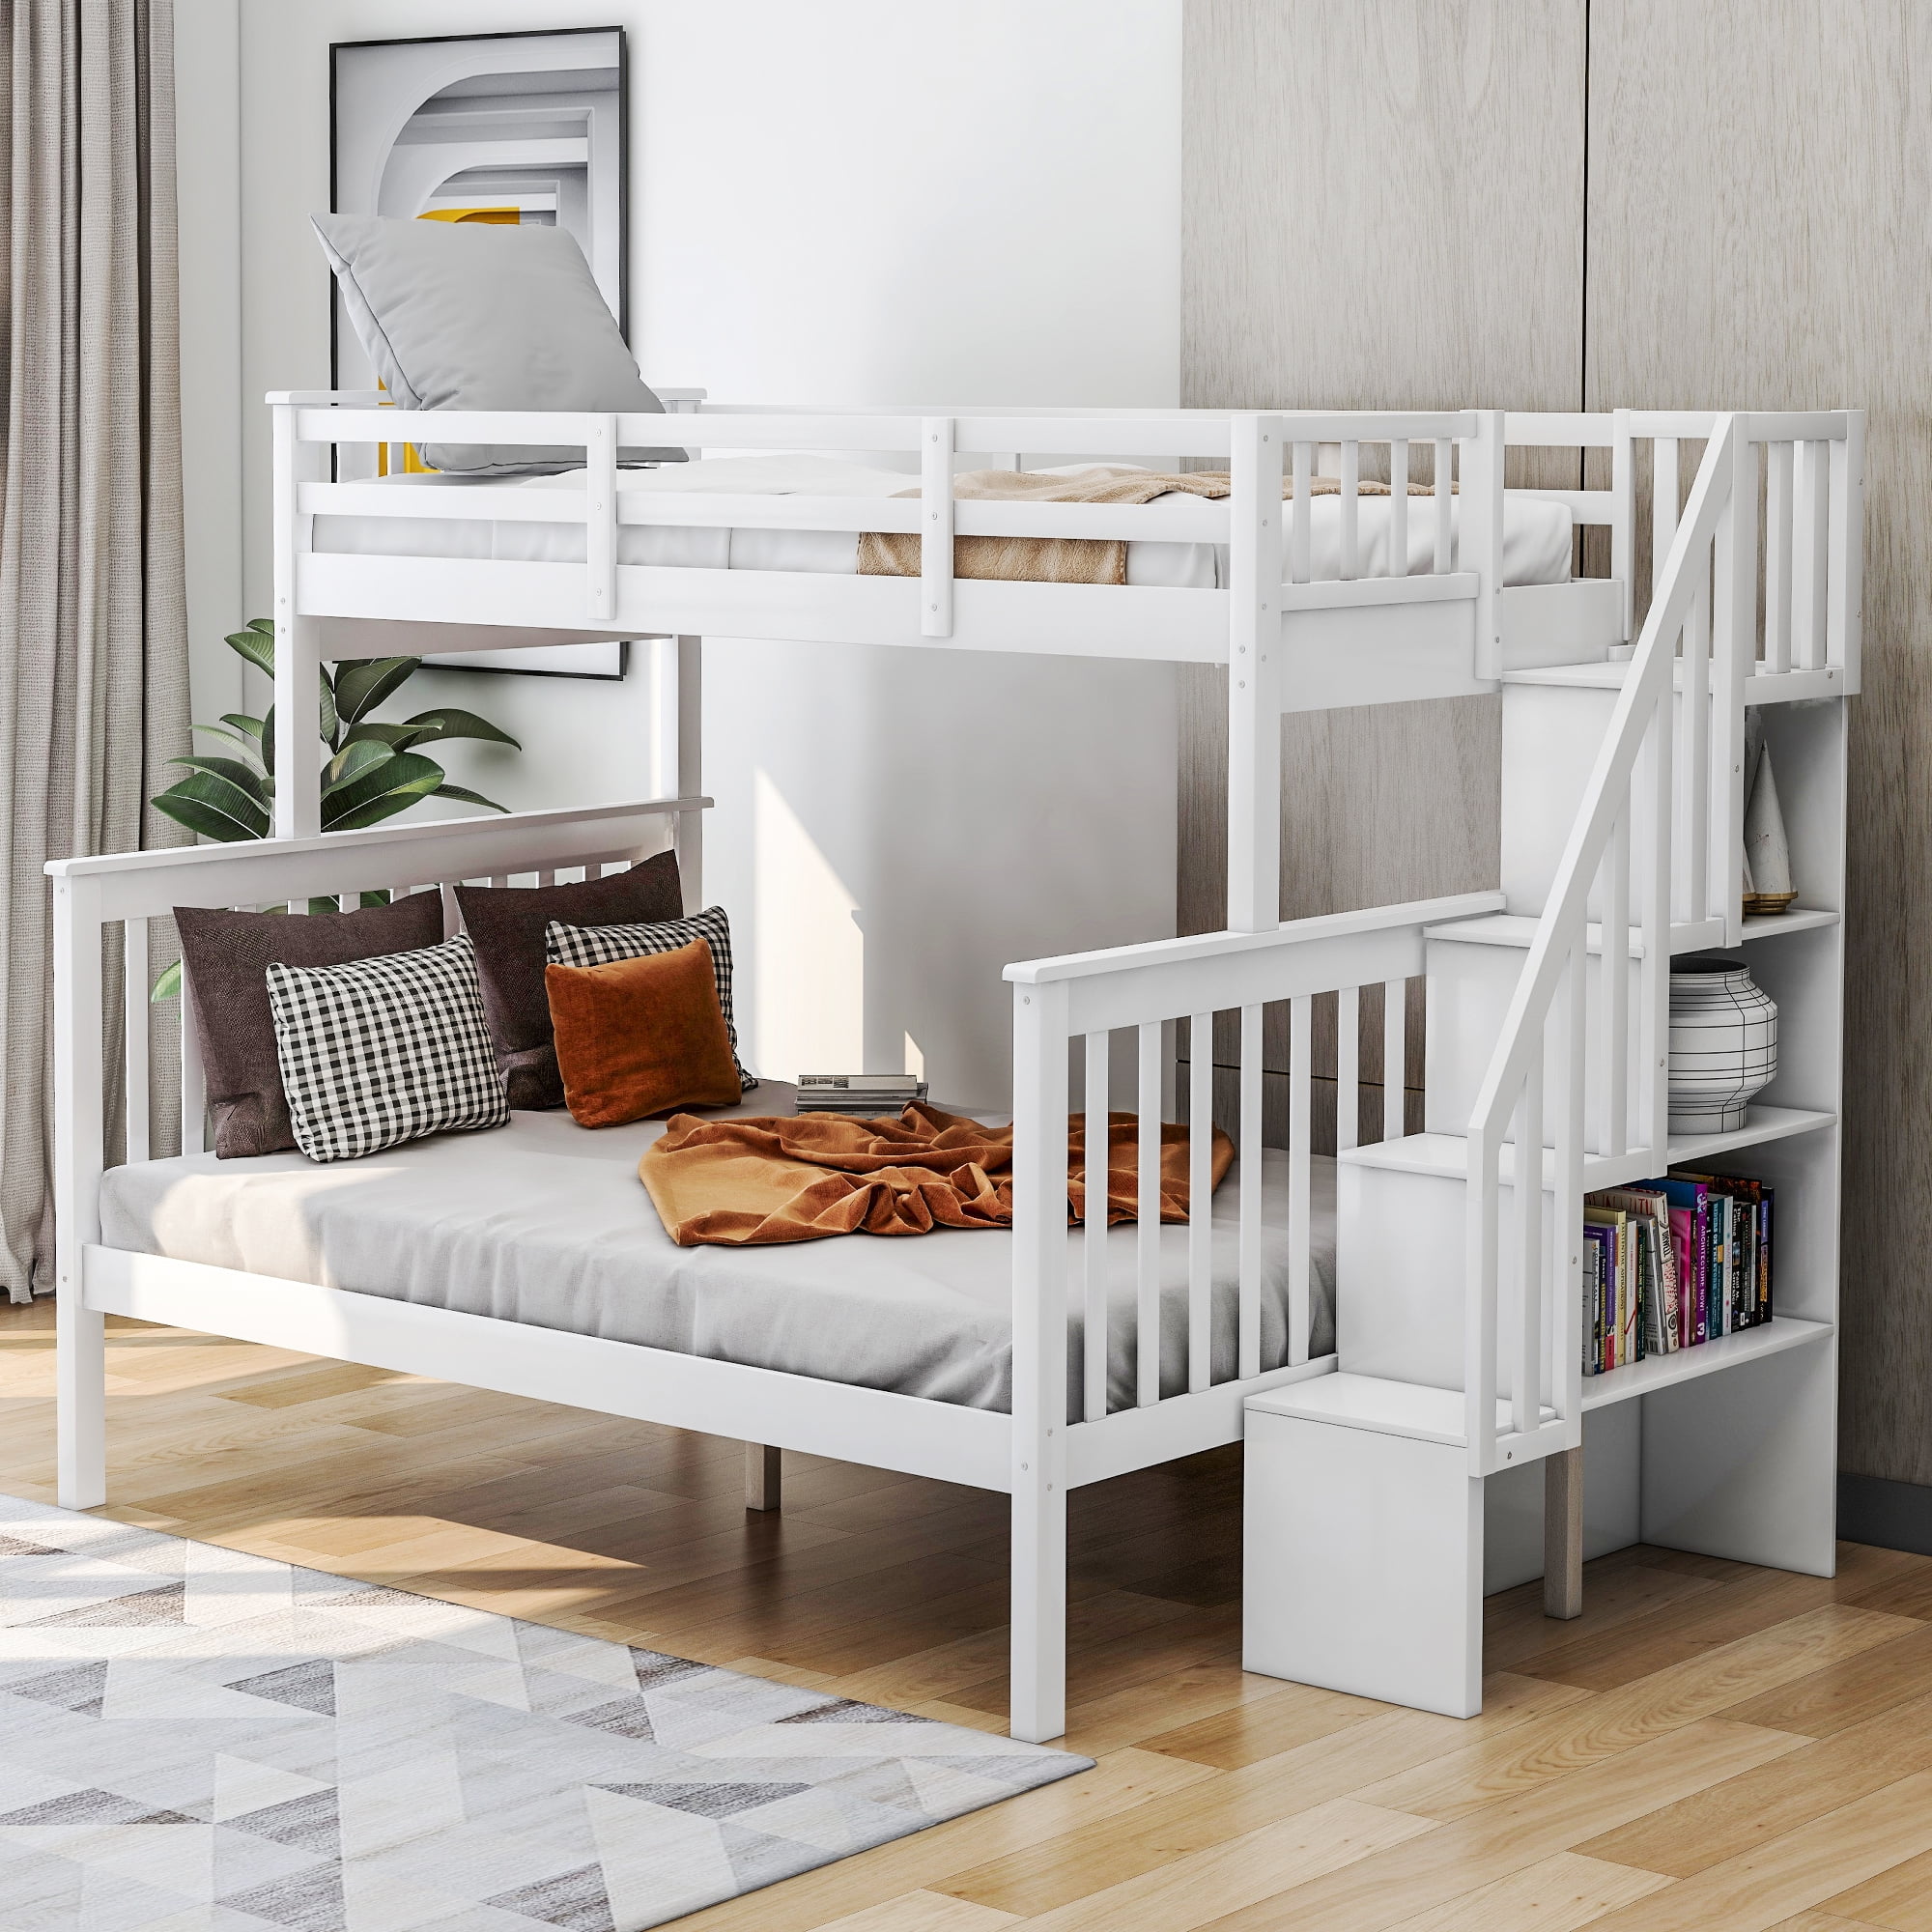 Kids Bunk Beds For Boys Girls Twin, Childrens Full Size Bunk Beds